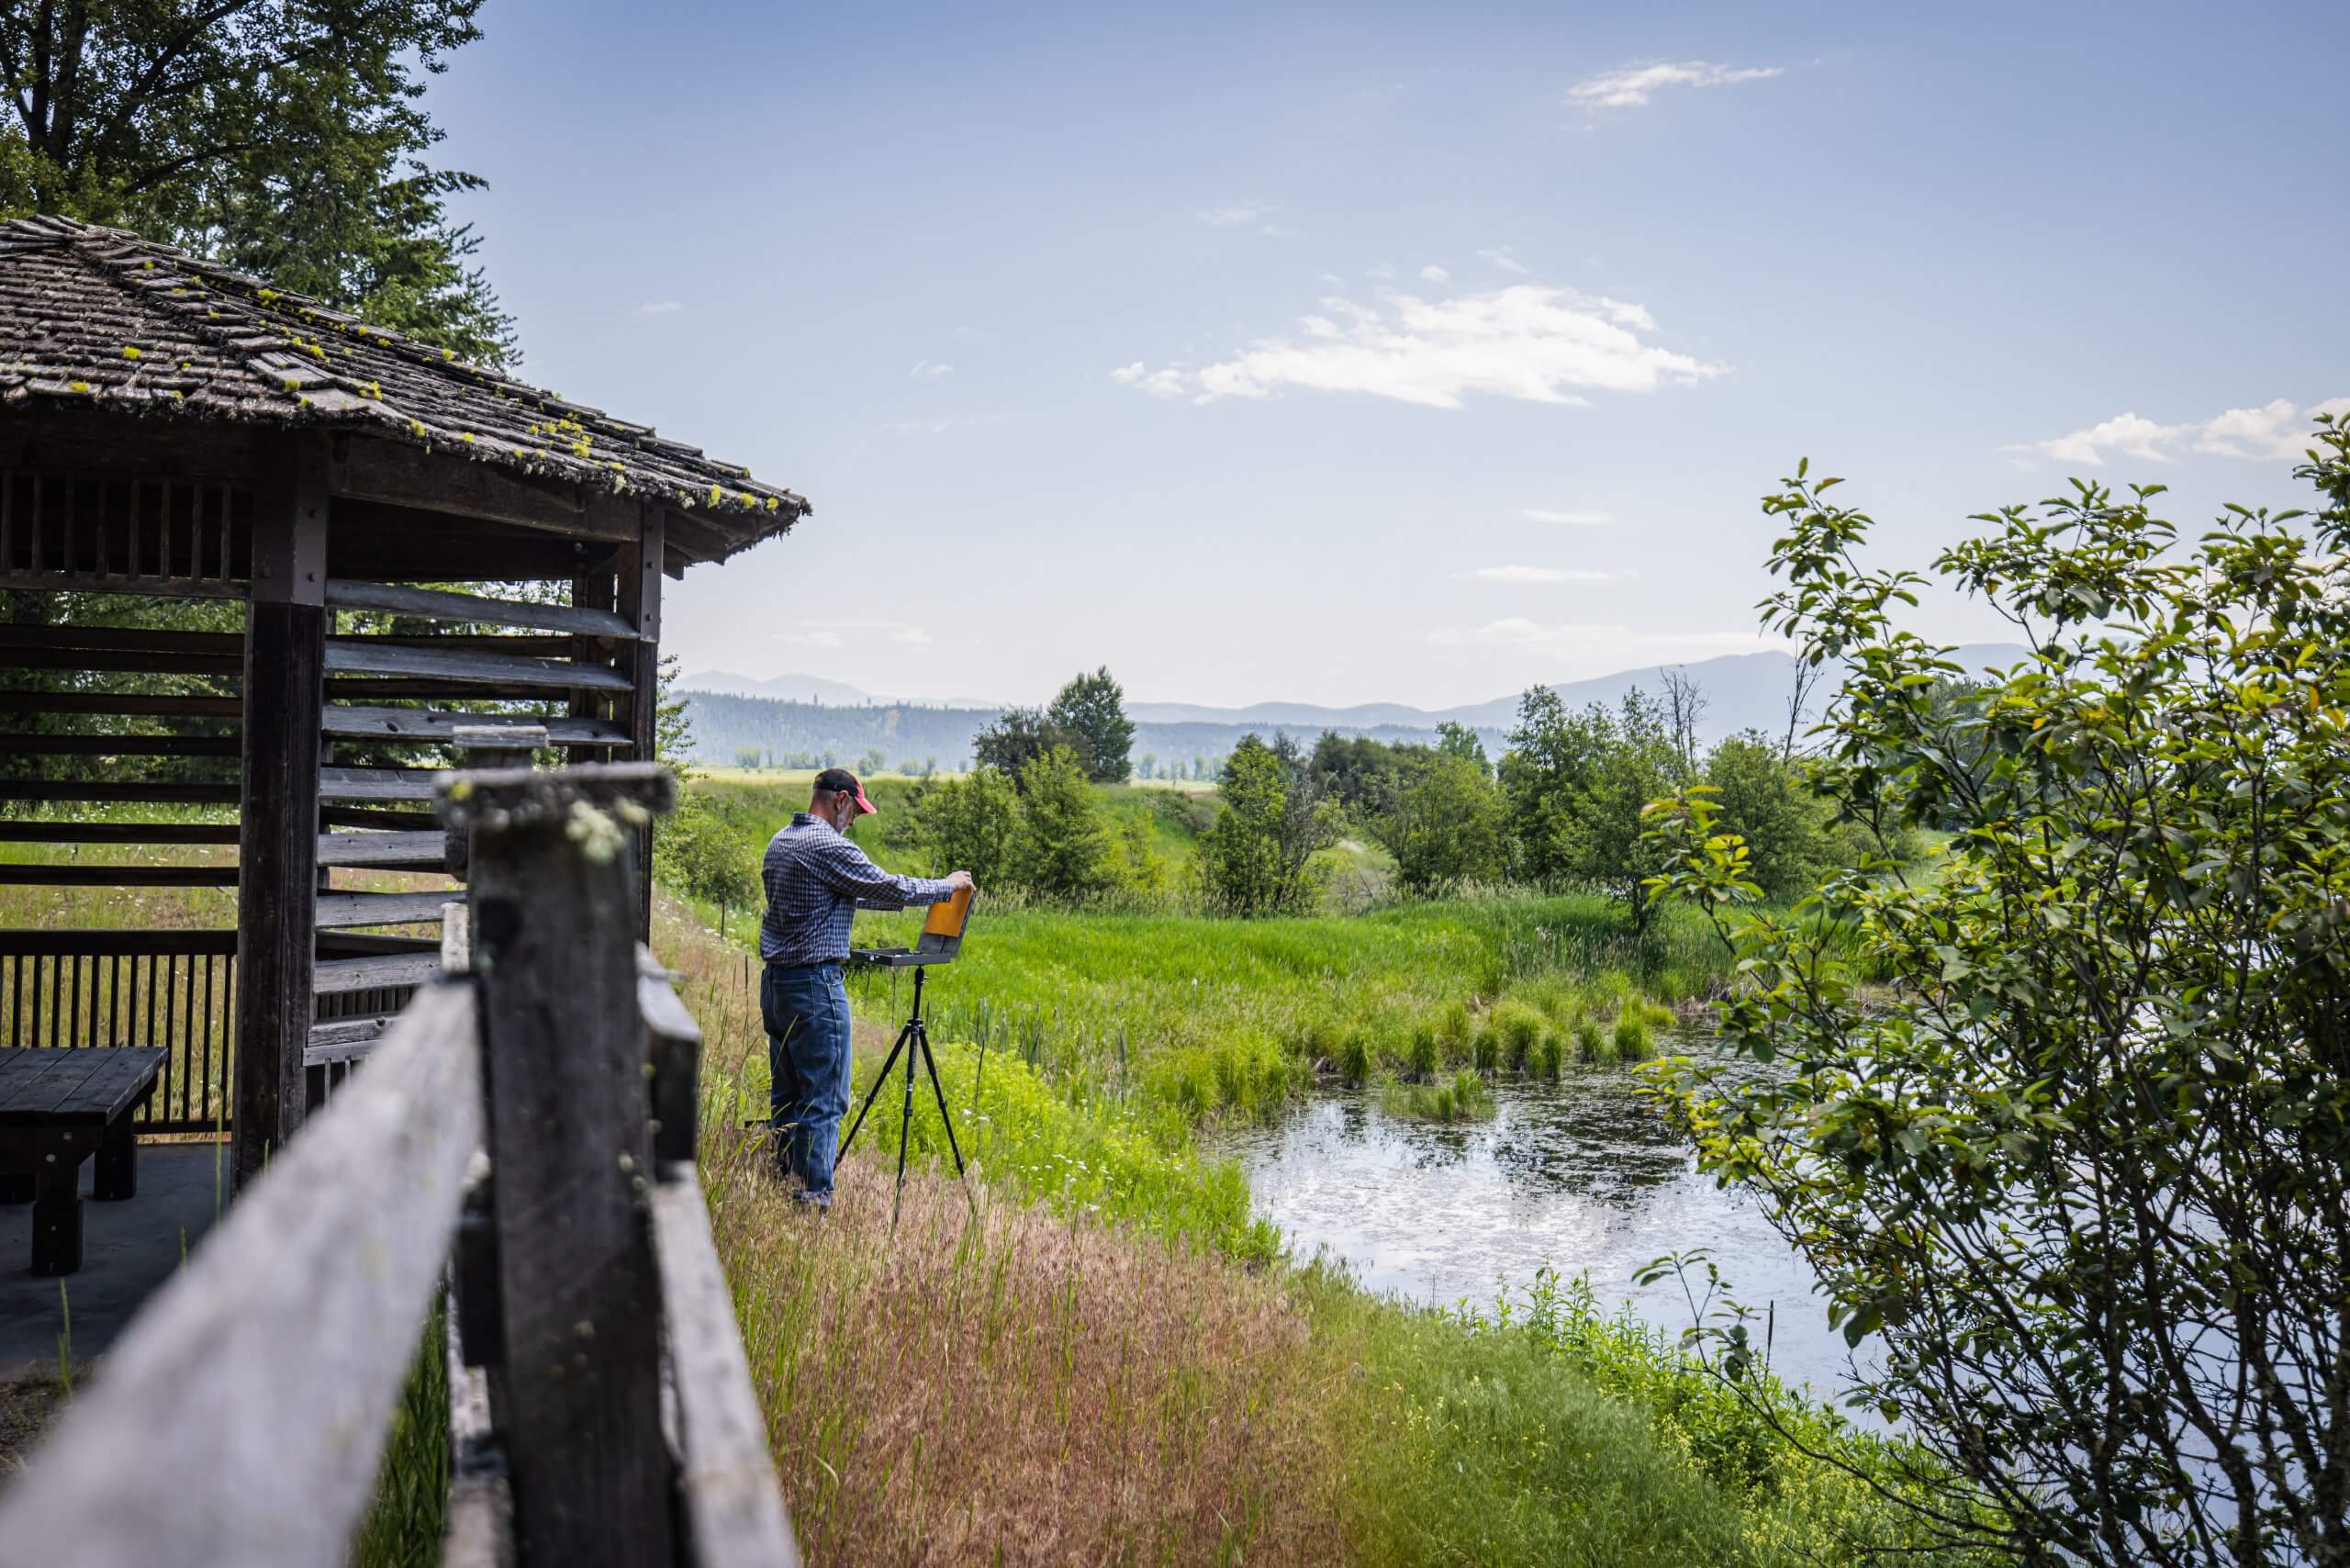 A man plein air painting in a field of tall grass in front of a body of water at Kootenai National Wildlife Refuge.